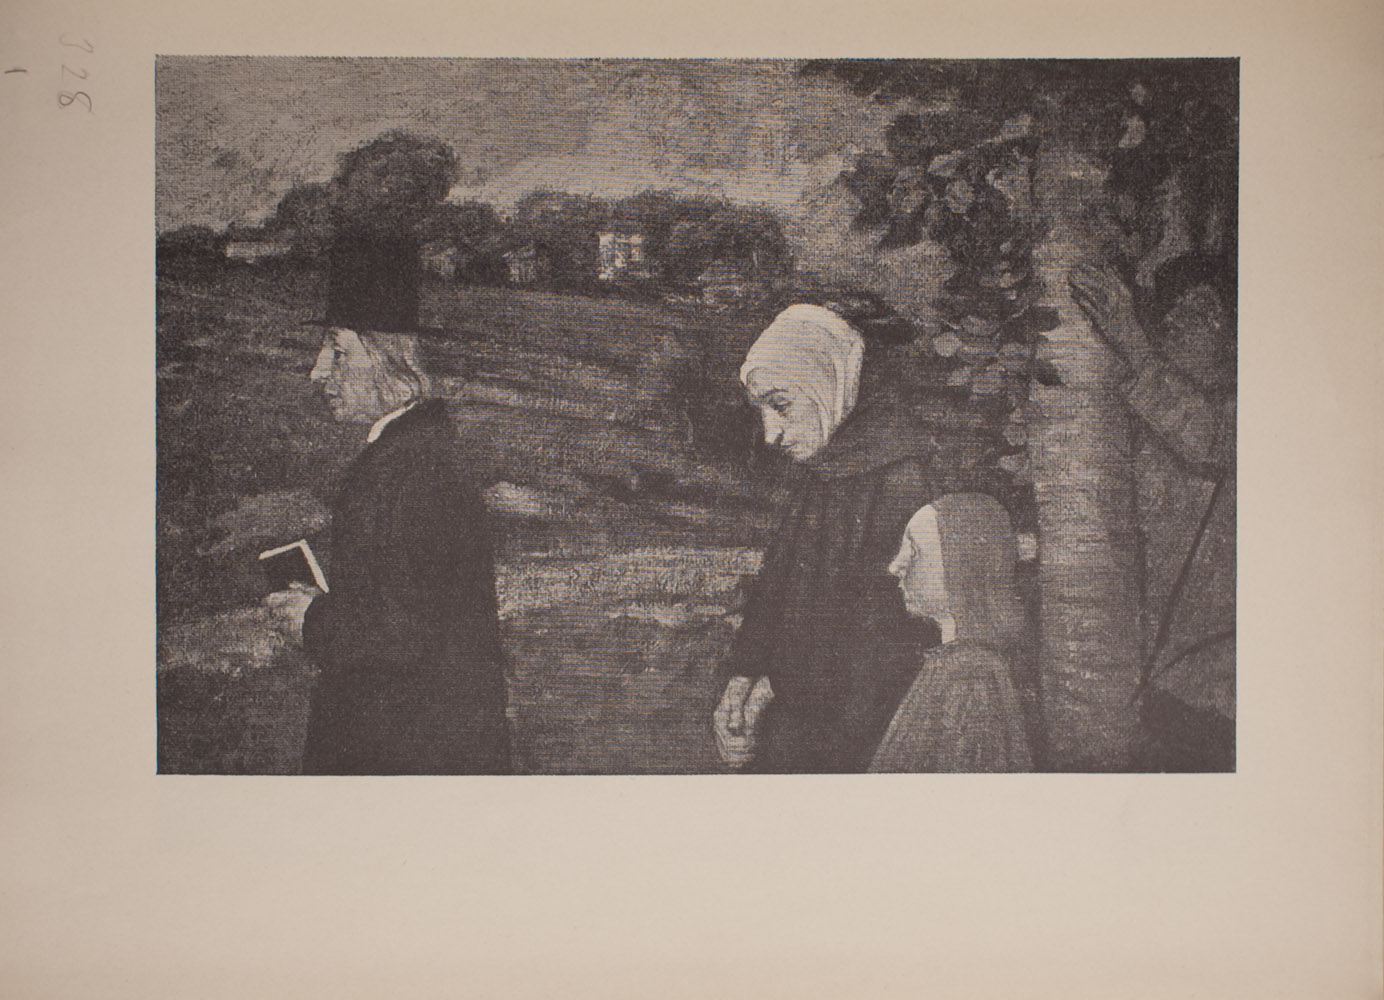 The image is of four standing figures The figure on the far left of the image is a light haired man in a top hat dark coat and white collar He is holding a book in his left hand He is in profile facing left To the right of him is a woman wearing a light coloured head covering hiding her hair She is also wearing a dark coloured hooded cloak Her hands are folded in front of her down by her waist She is in profile facing left Her head is slightly bowed and her gaze is cast downwards Beside and slightly to the right of the woman is a child of indeterminate gender The child has shoulder length hair The child is in profile facing left and its gaze is to the left Only the top half of the childs body is visible To the right of the man woman and child is a tree There is a man behind and slightly to the right of the tree His left hand is resting on the tree trunk He is wearing a light coloured shirt and a hat and his gaze is upwards In the middle ground there is a field or valley and in the background there are buildings The image is horizontally displayed